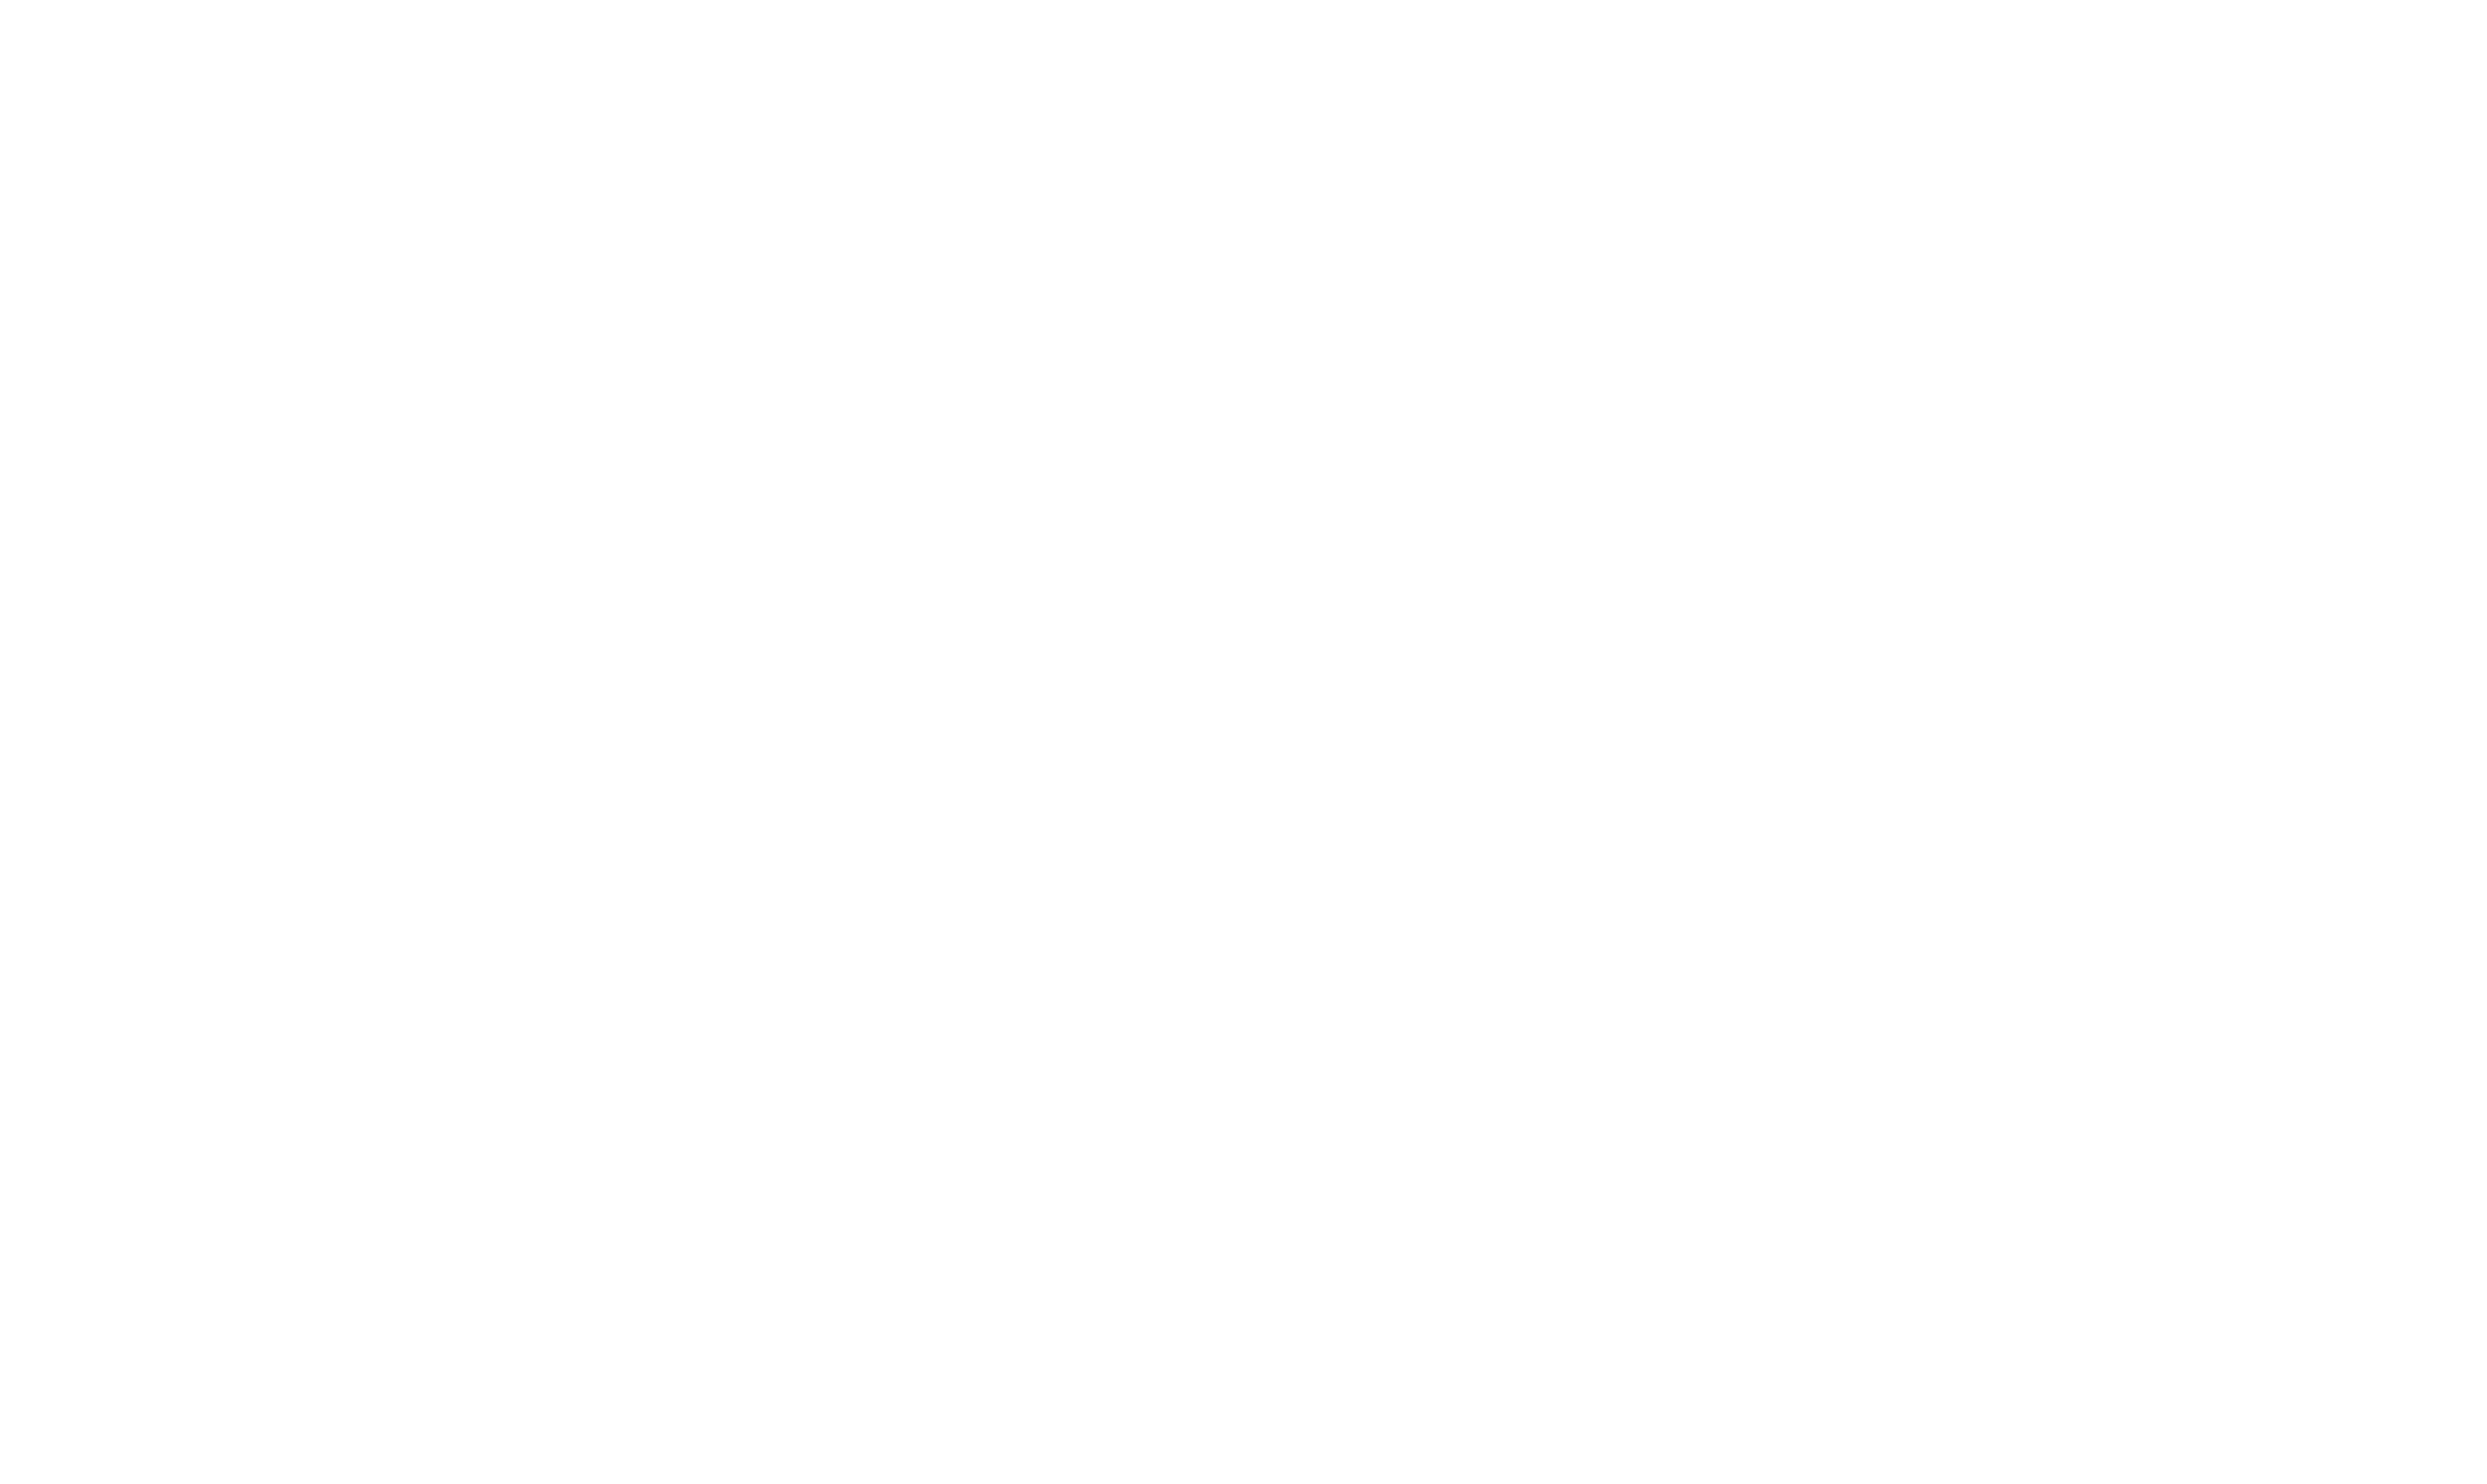 Lace clipart flower, Lace flower Transparent FREE for download on